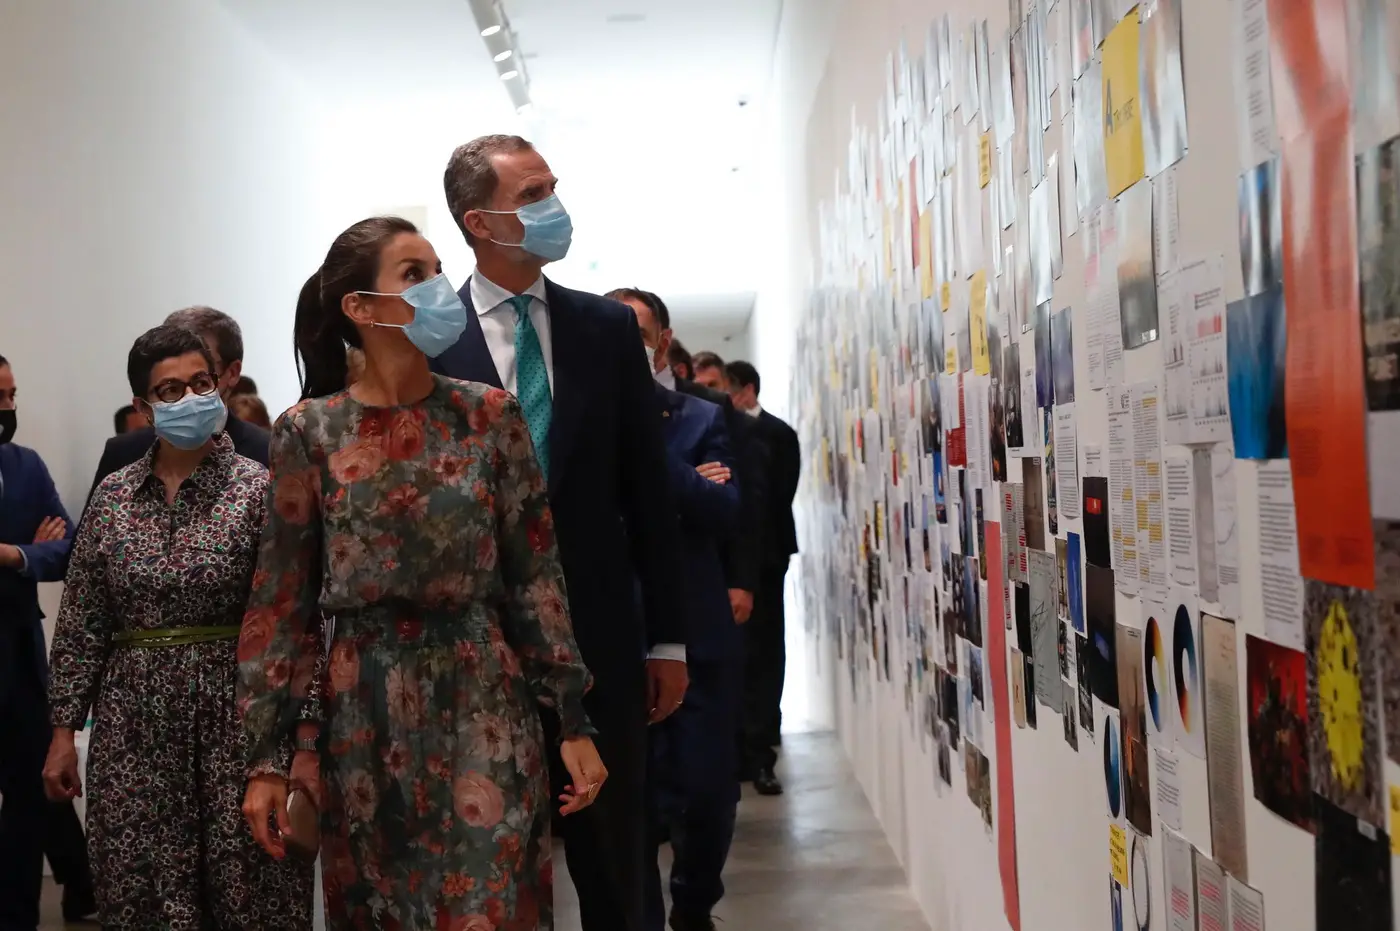 King Felipe and Letizia visited an exhibition ‘In Real Life’ by the Danish-Icelandic artist Olafur Eliasson at the Guggenheim Museum